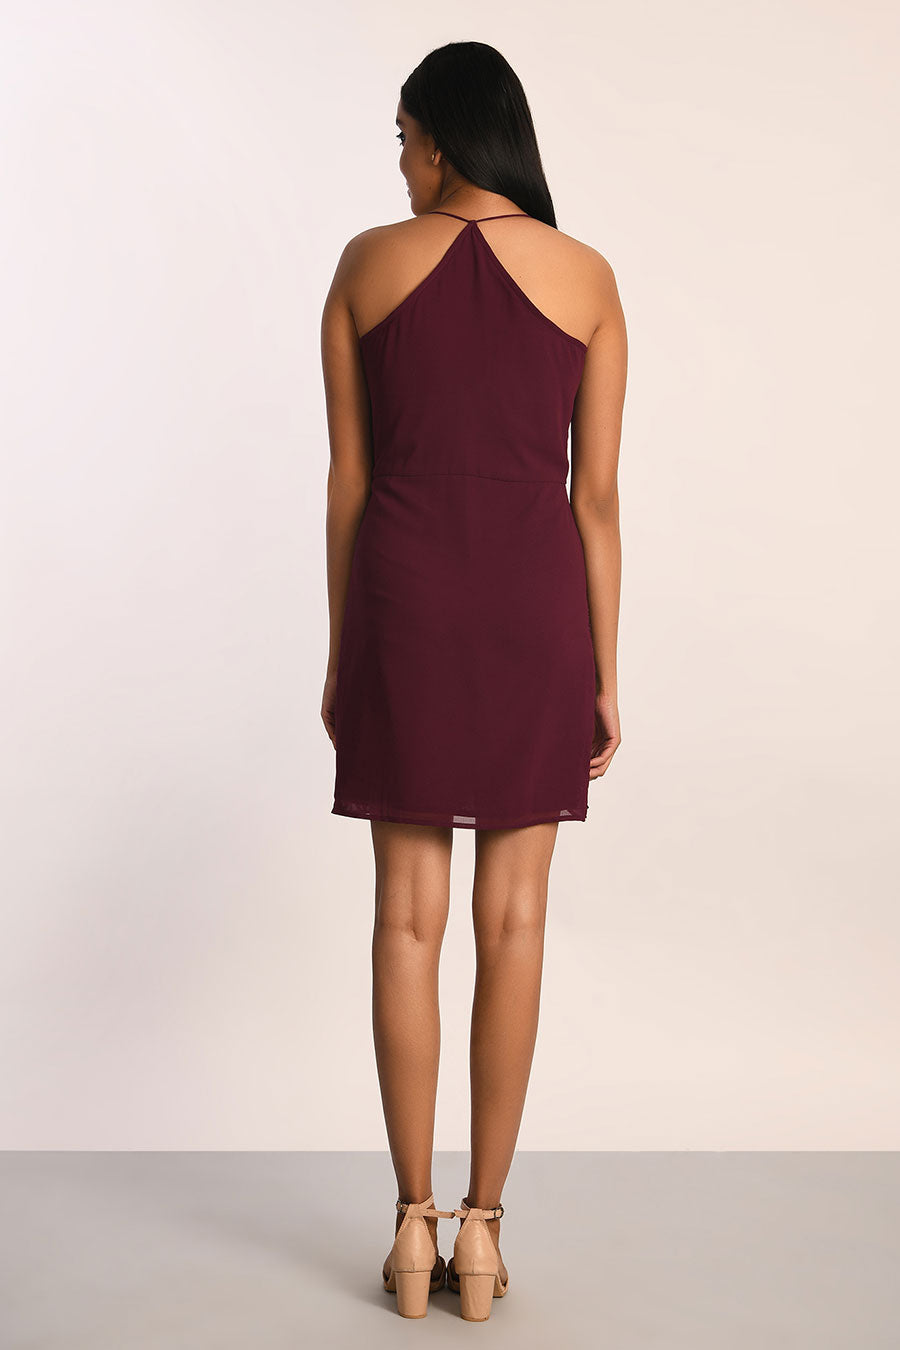 Plum Embroidered Strappy Dress